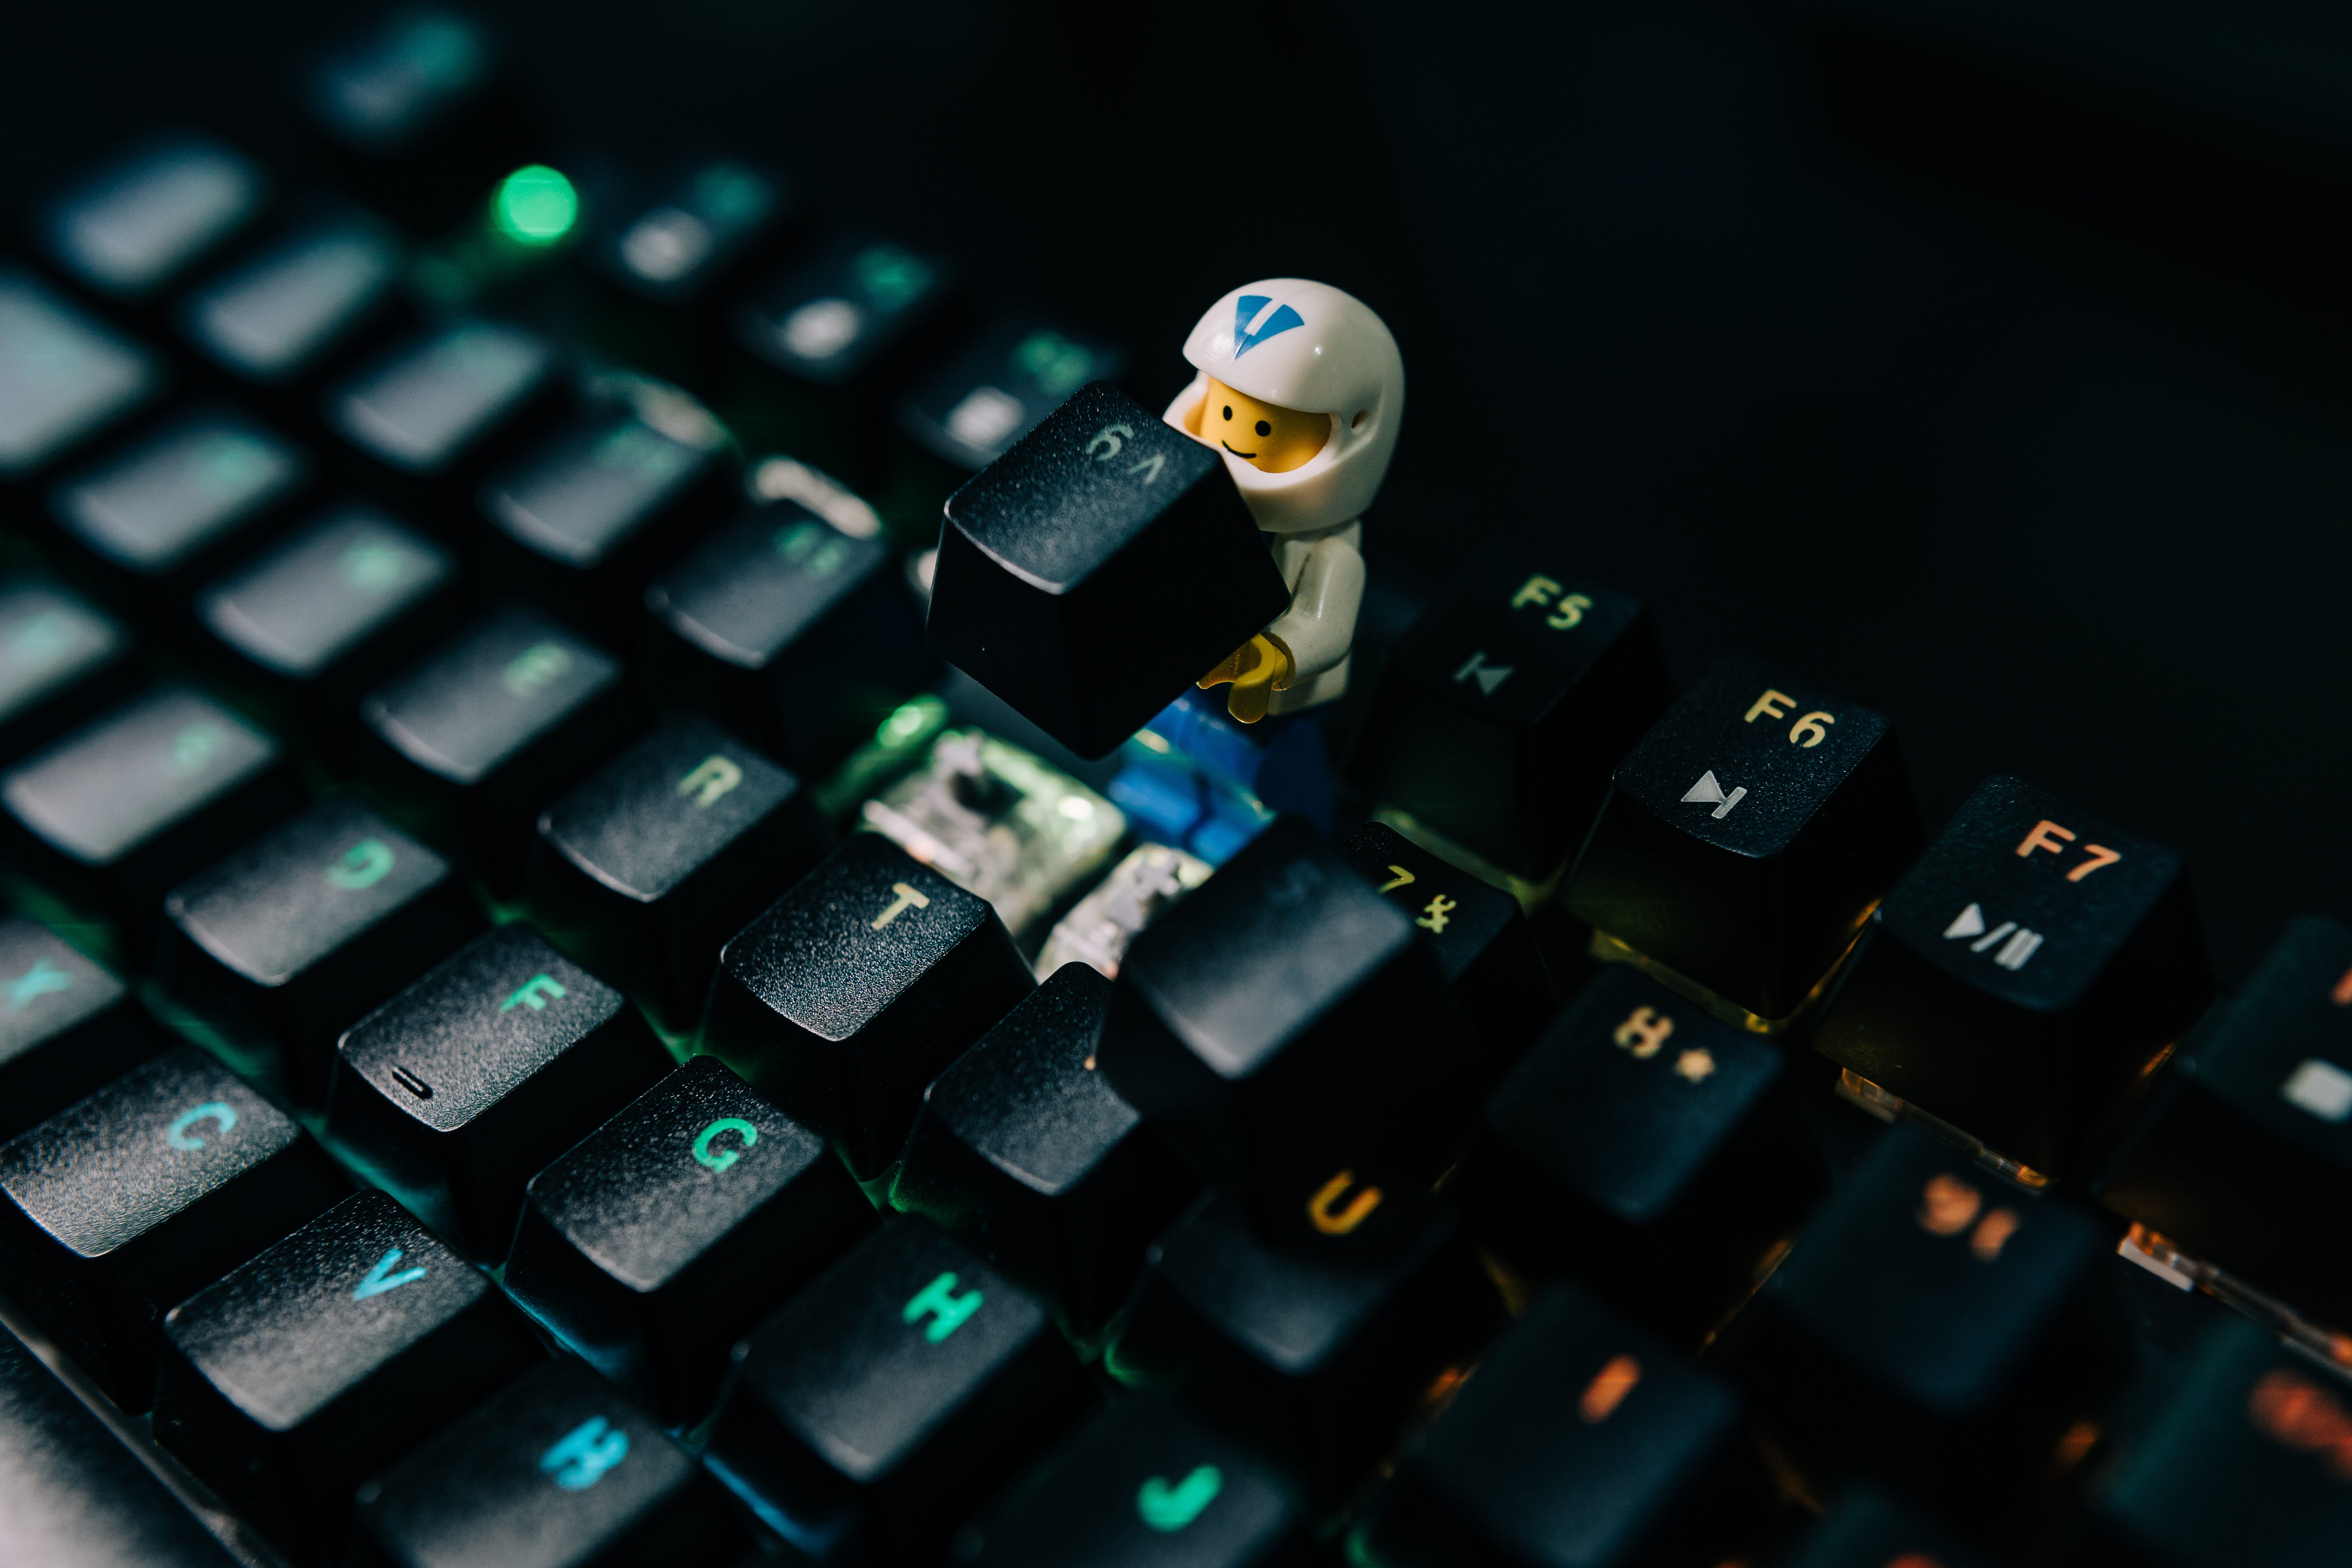 The Most Clicky Mechanical Keyboard Switch | Medium